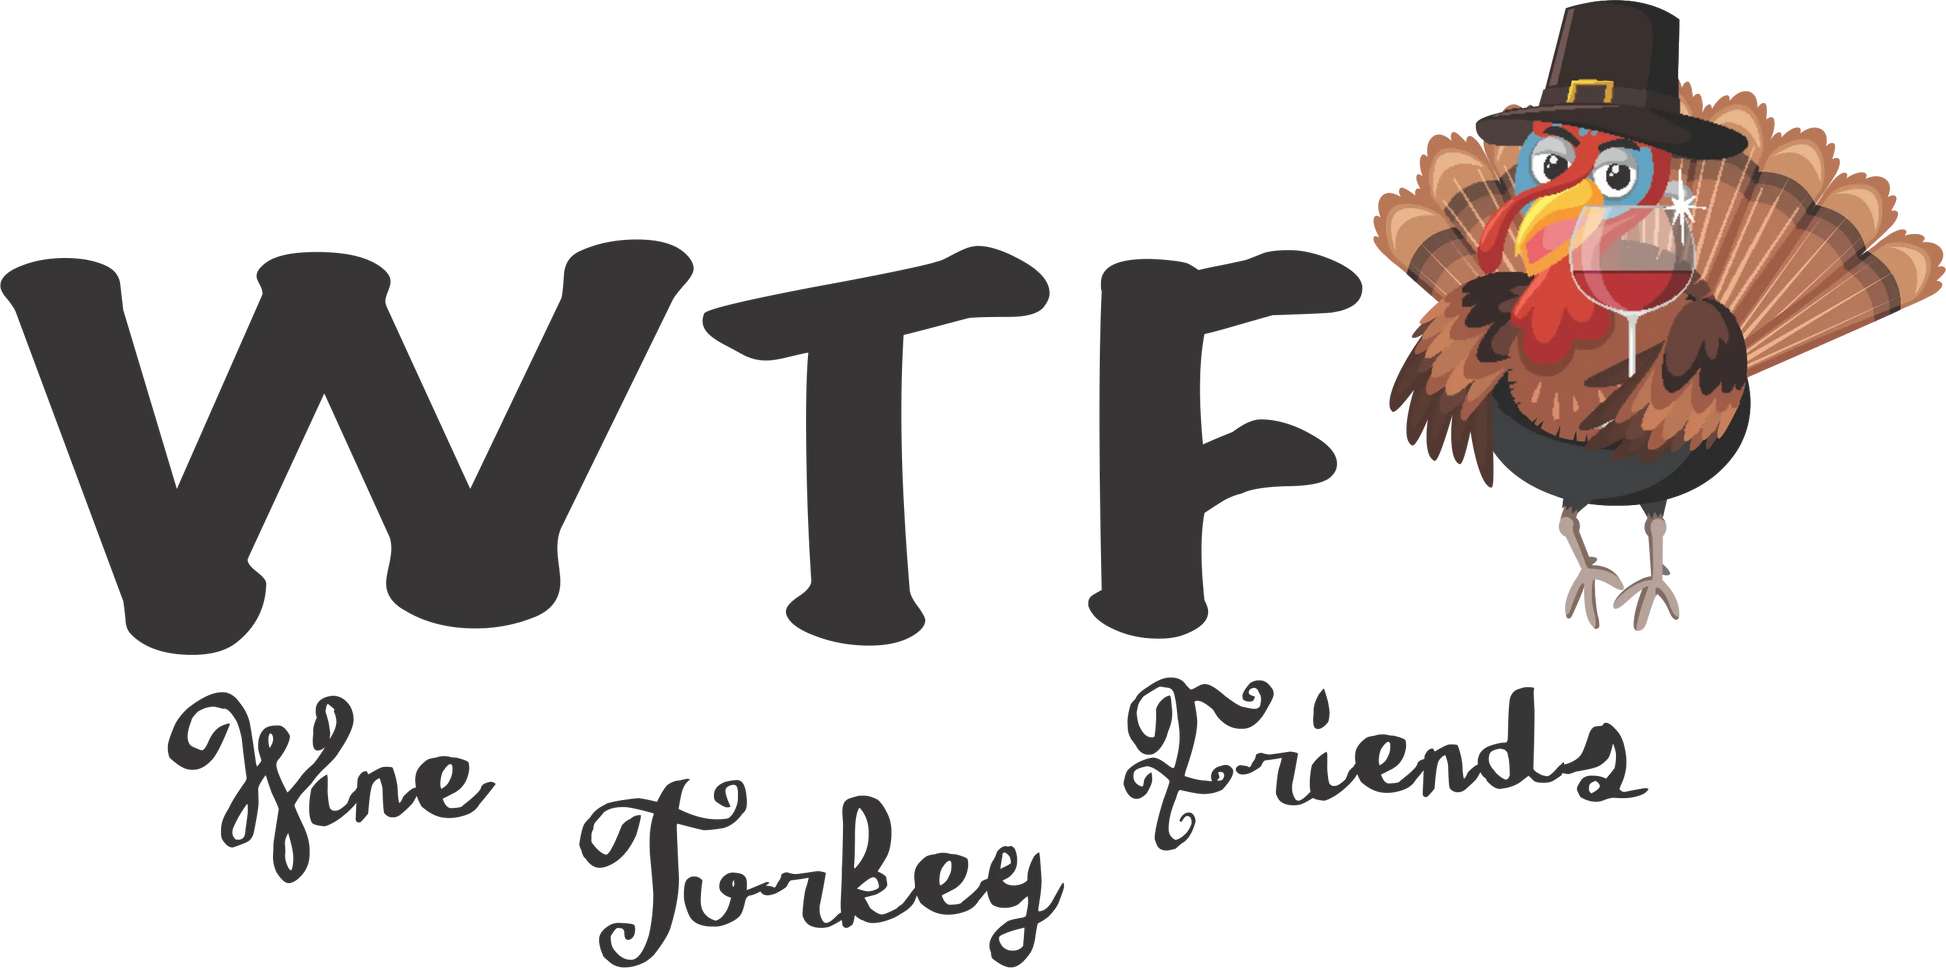 TA35 WTFriends, DTF Transfer, Apparel & Accessories, Ace DTF